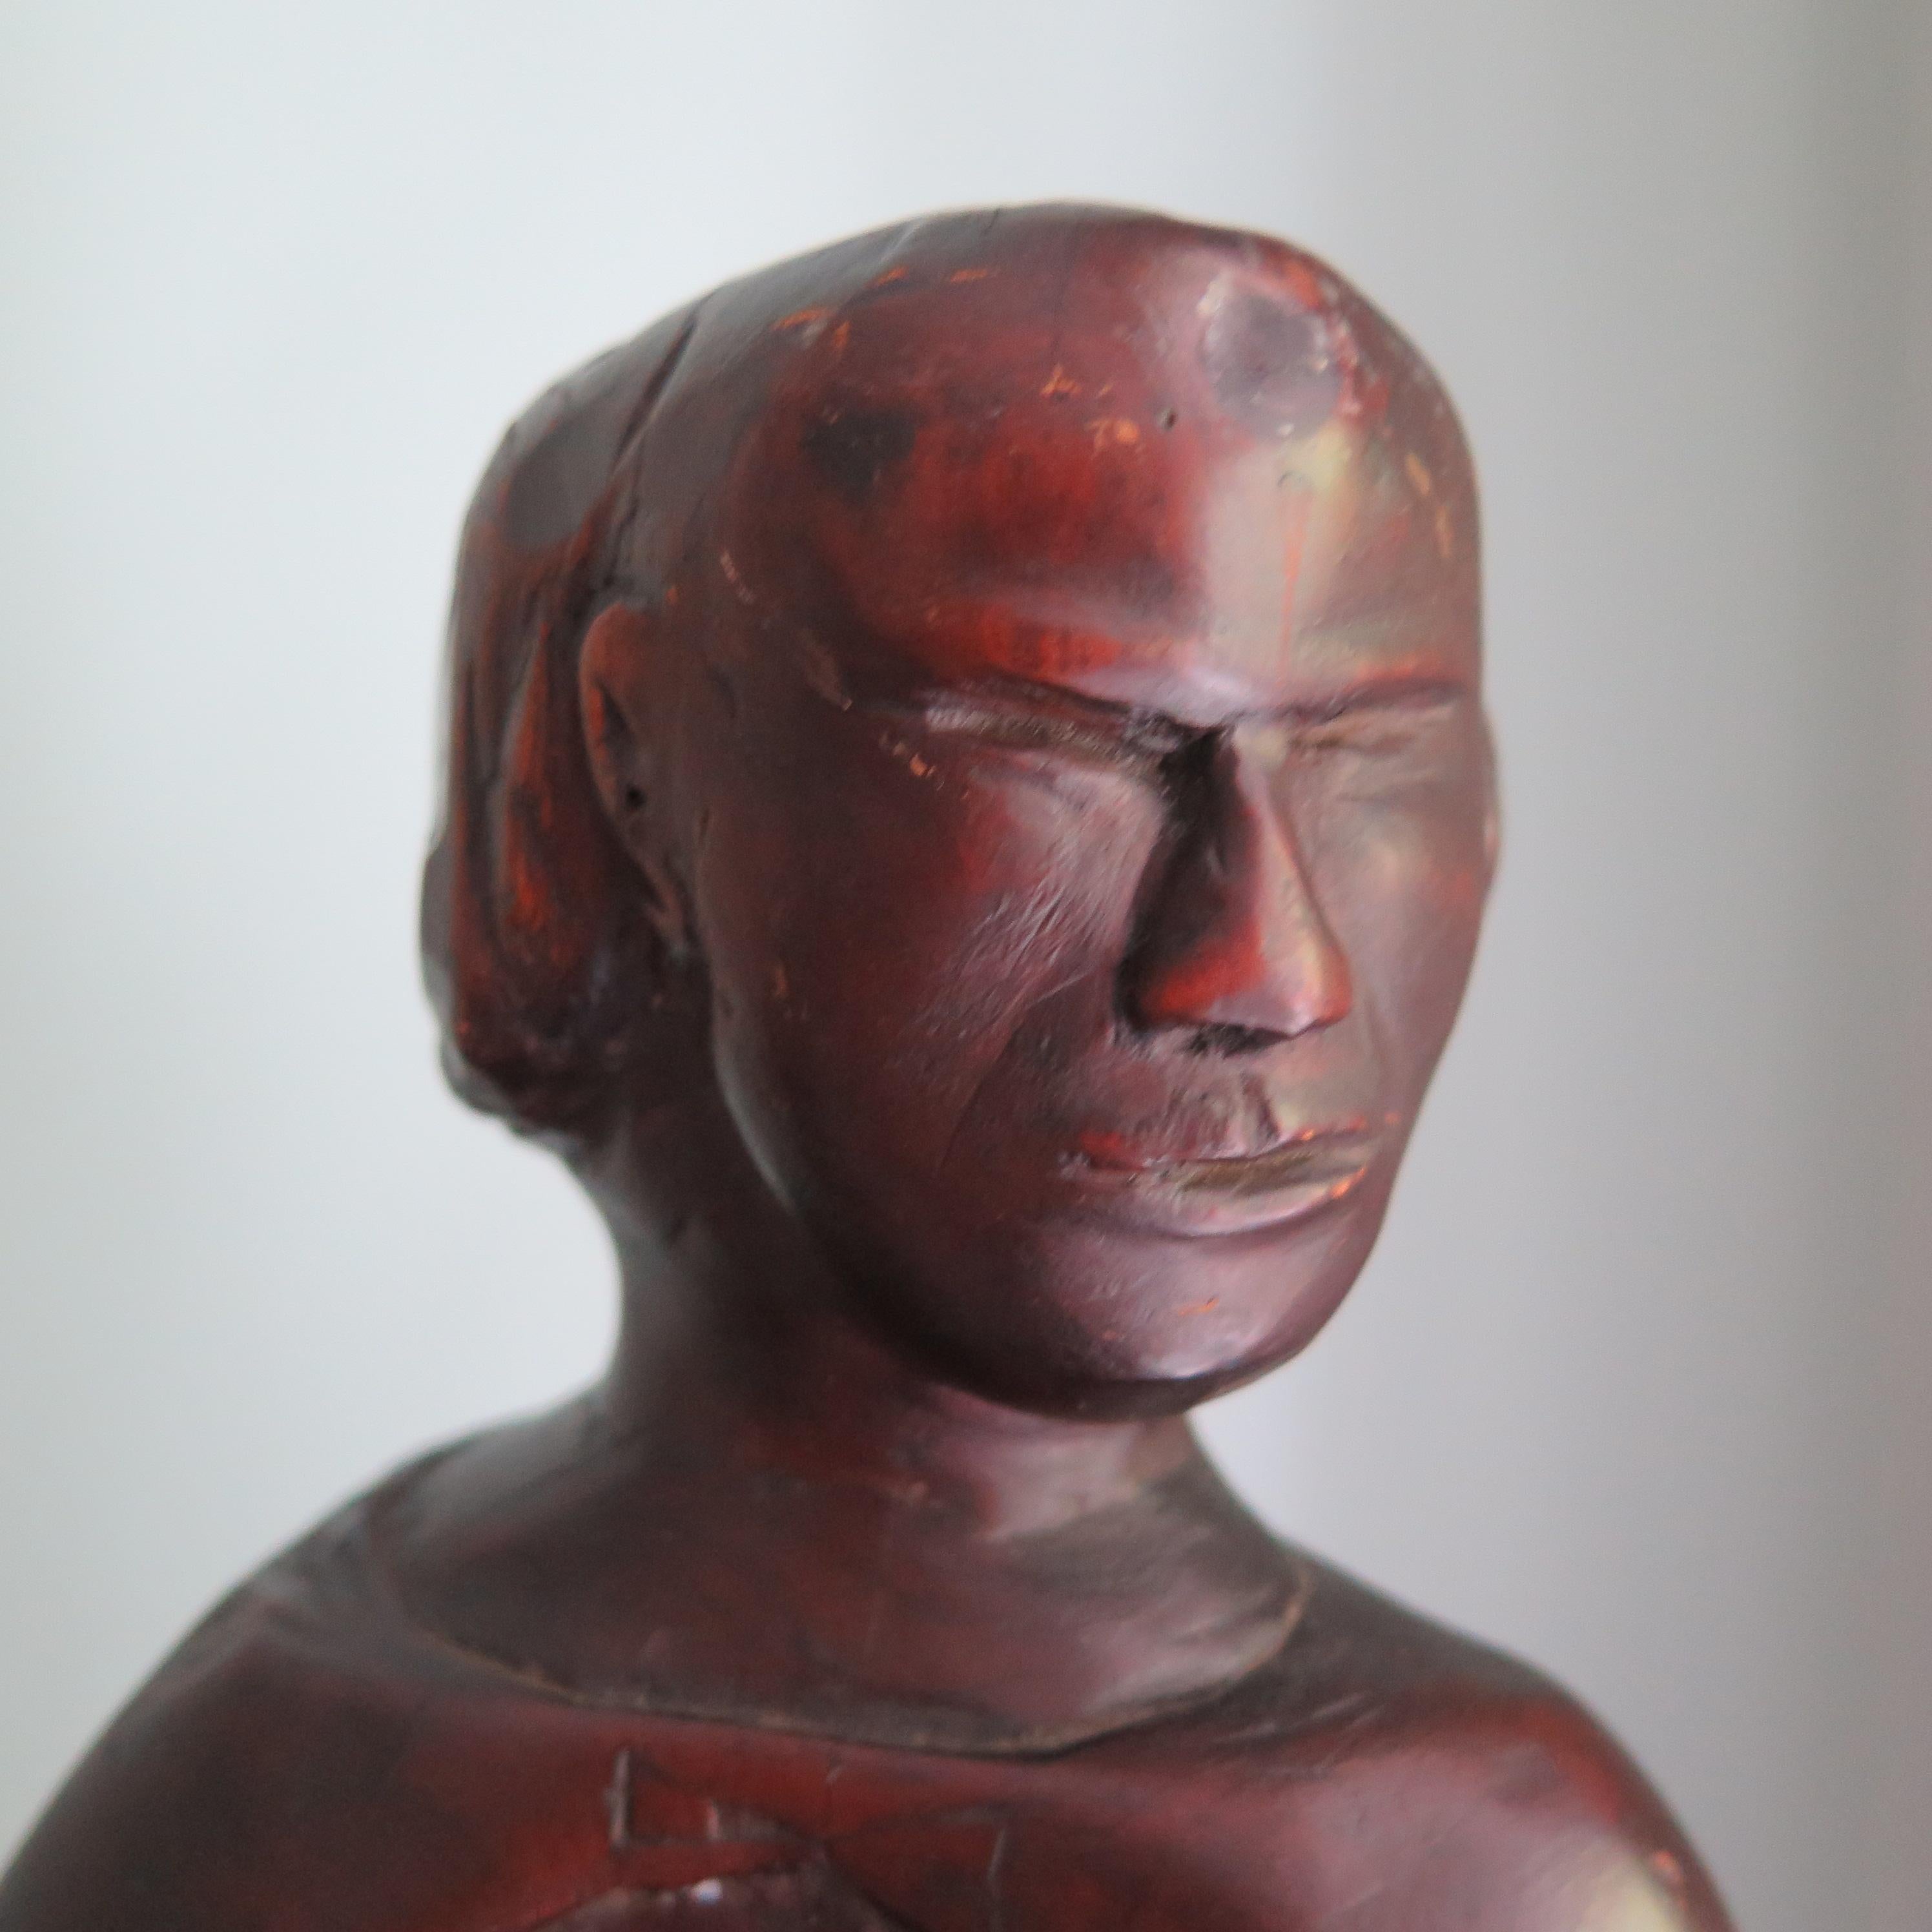 Folk sculpture of a carved wood nude with mask-like face. The turned body is made more dramatic by the draped cape and the surface with patina of age.